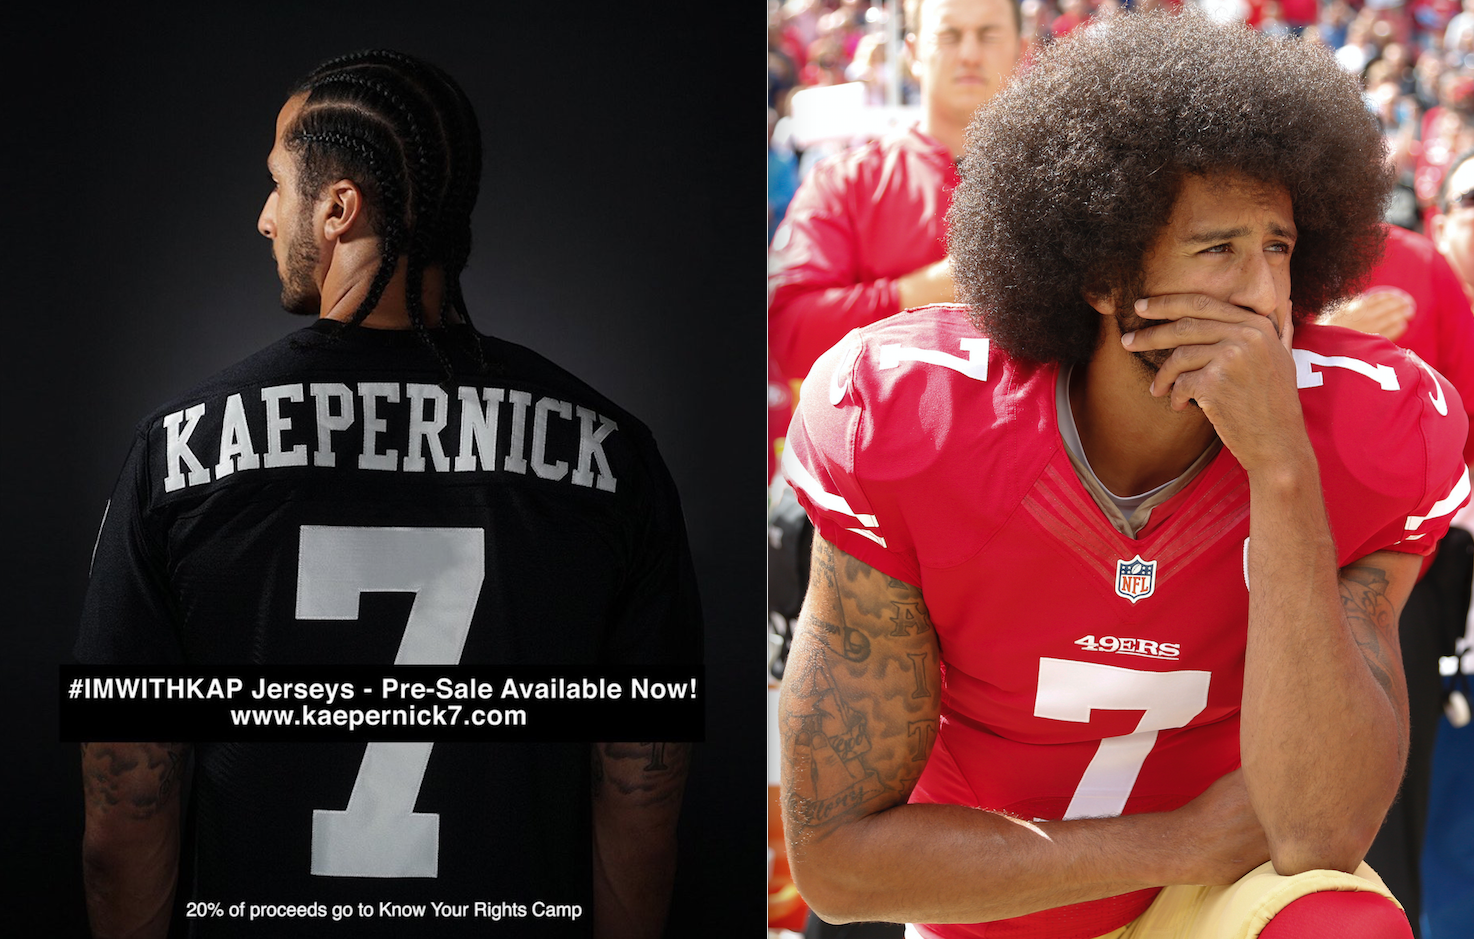 how much is a kaepernick jersey